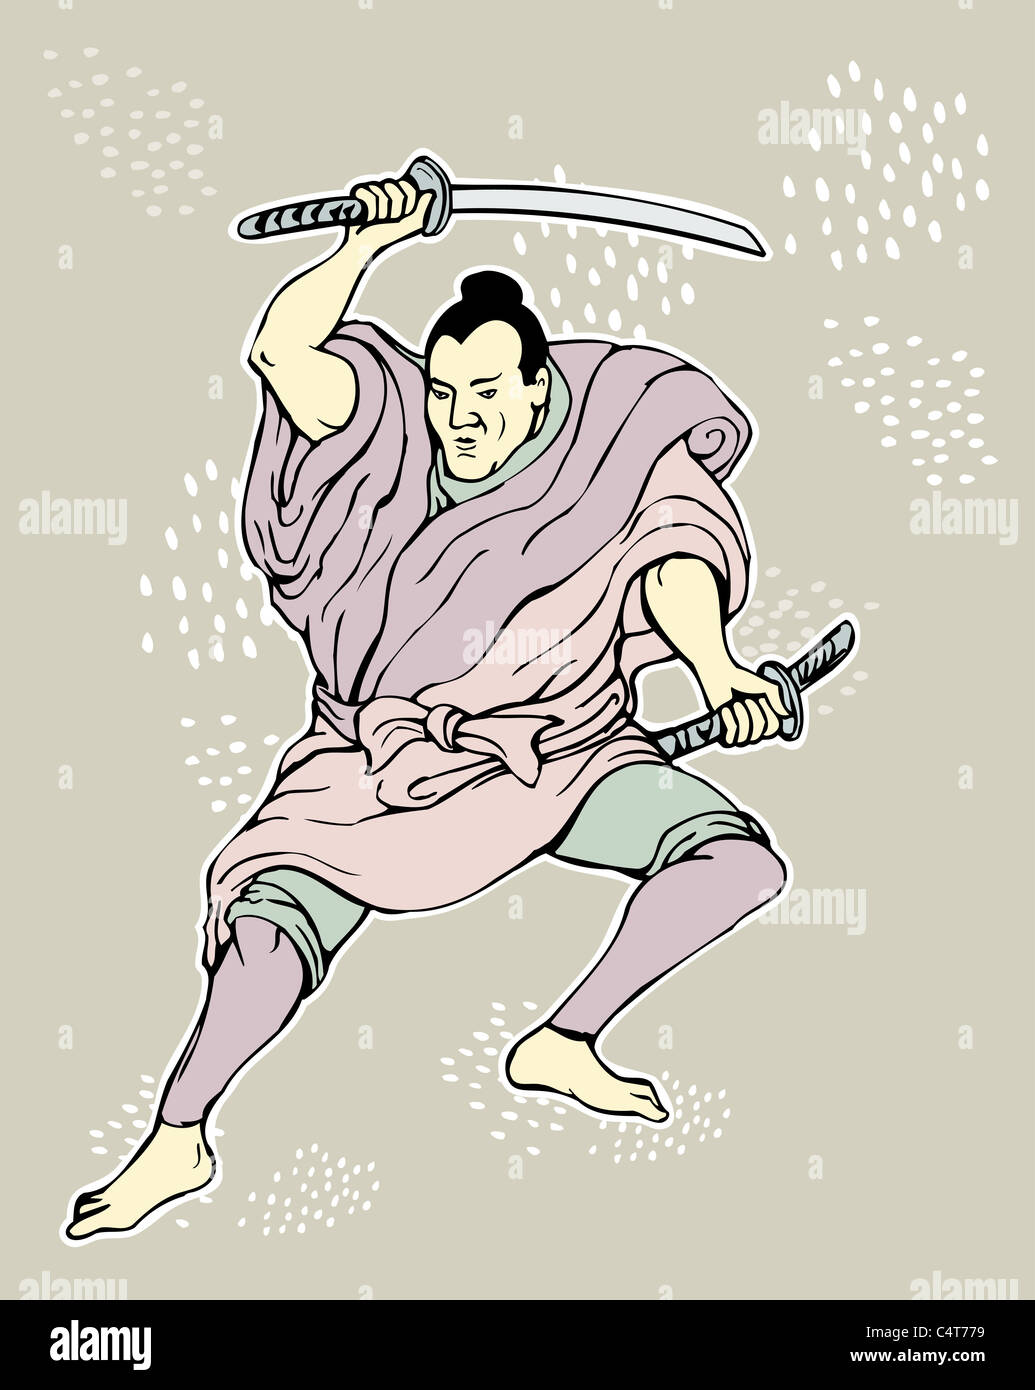 illustration of a Samurai warrior with katana sword in fighting stance done in cartoon style Stock Photo